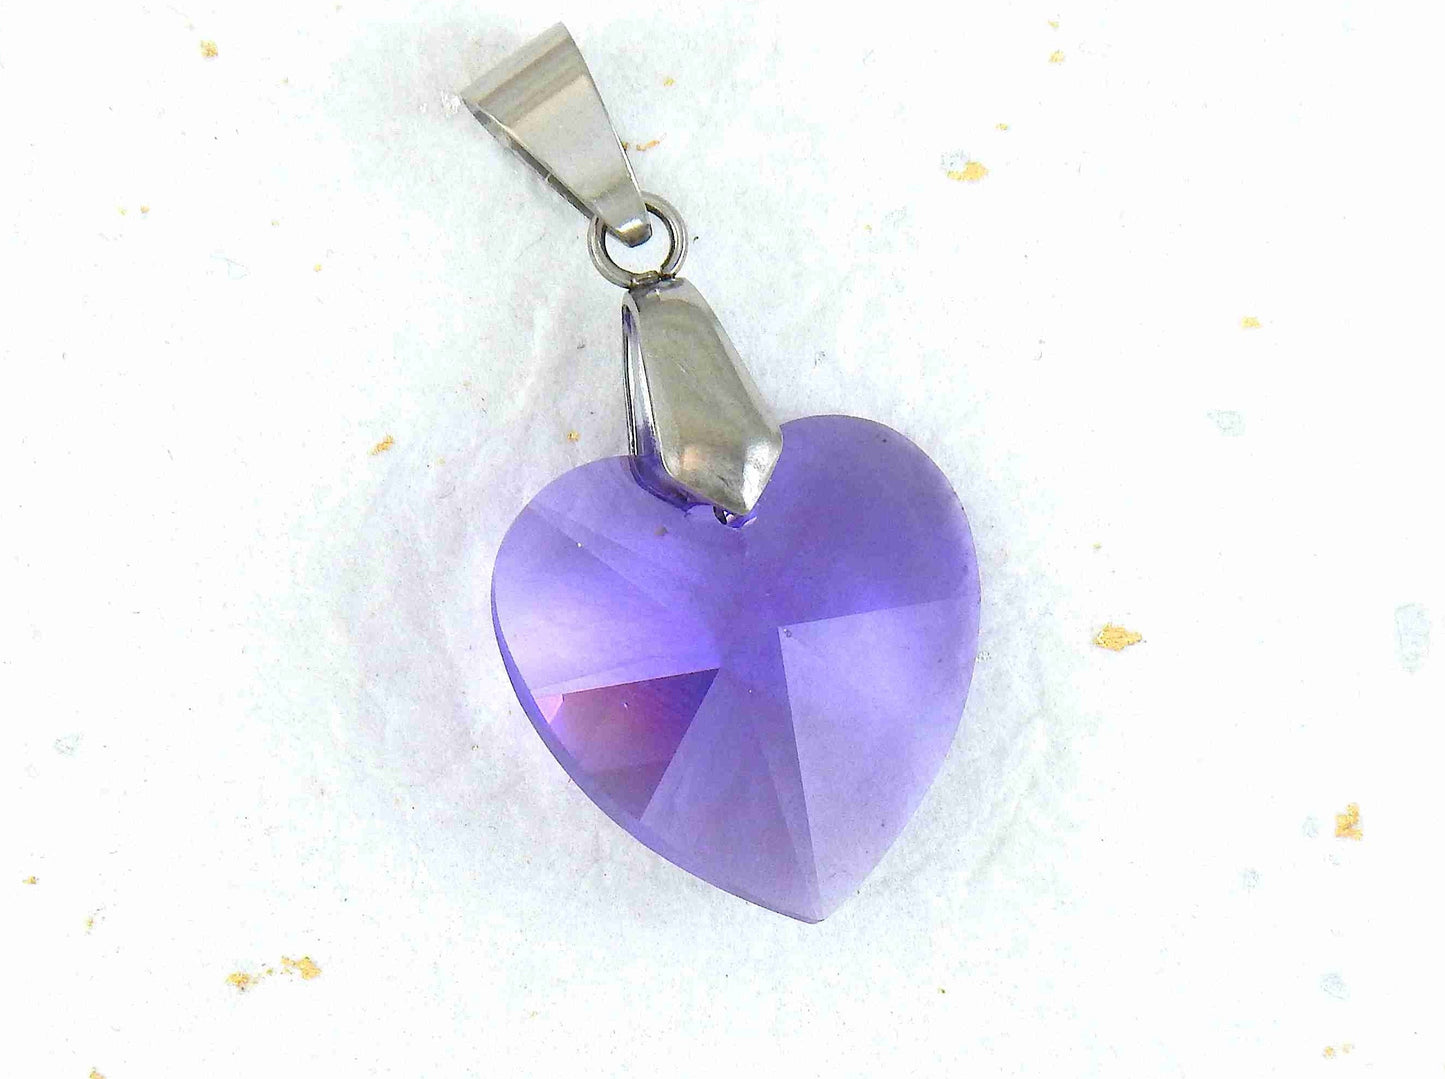 14/16-inch necklace with 20mm Blue Violet faceted Swarovski crystal heart pendant, stainless steel chain